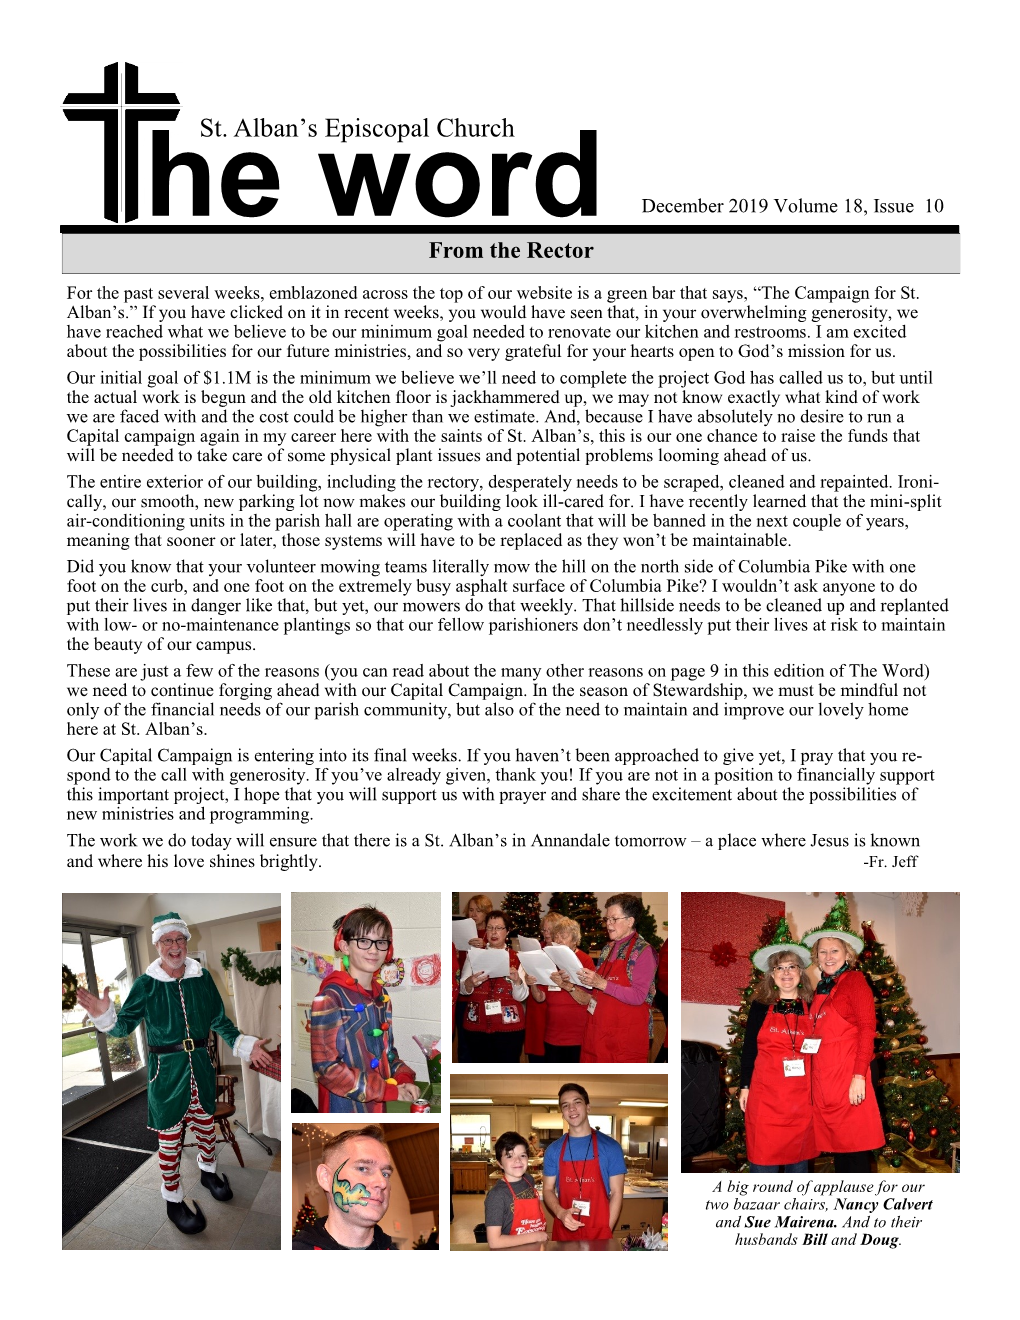 December 2019 Volume 18, Issue 10 from the Rector